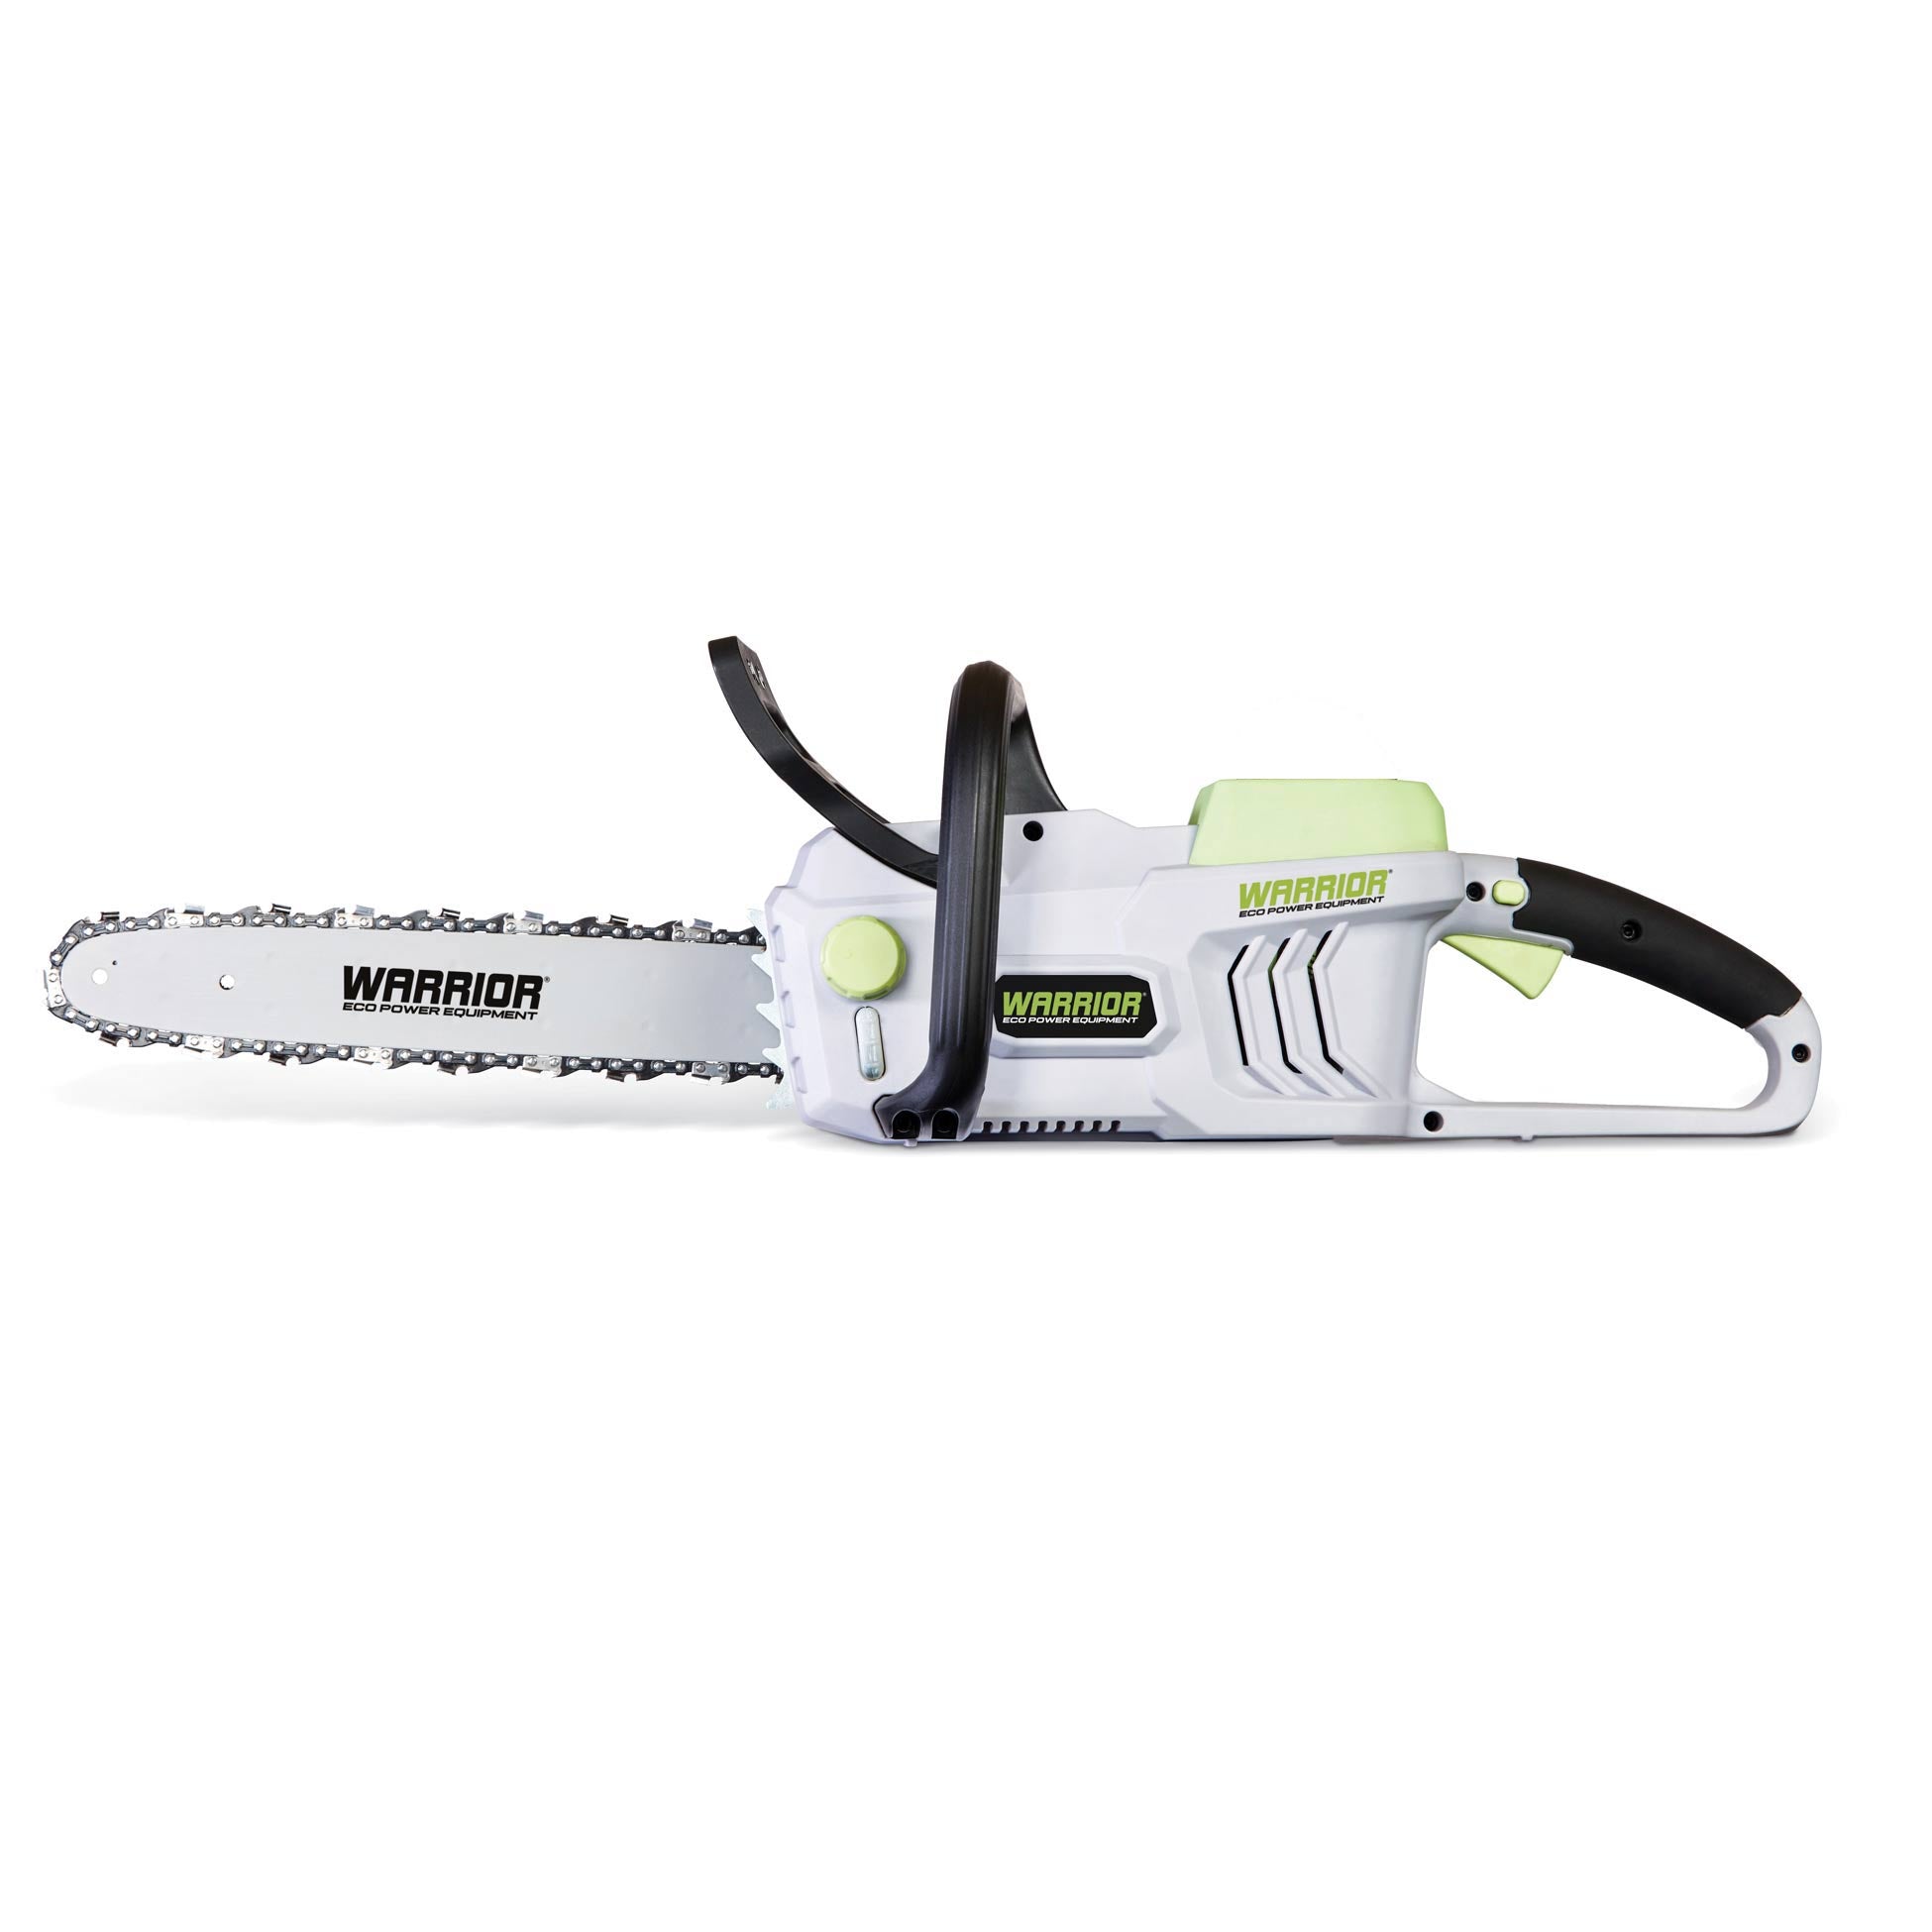 Warrior Eco Power Equipment Cordless 40v Chainsaw without 40v battery inserted